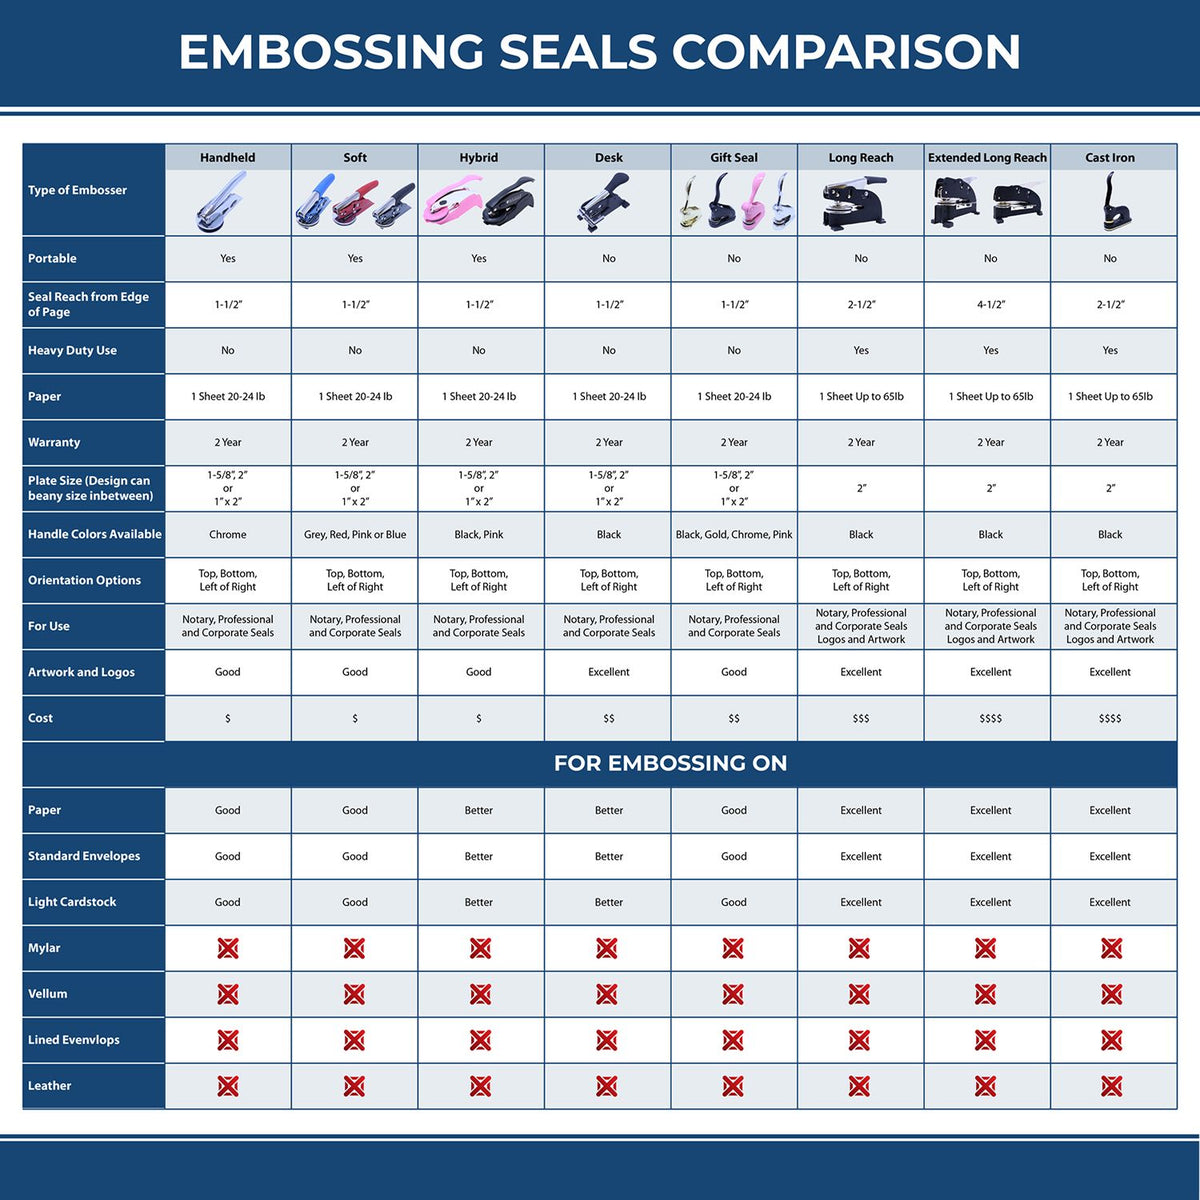 A comparison chart for the different types of mount models available for the Hybrid Washington Architect Seal